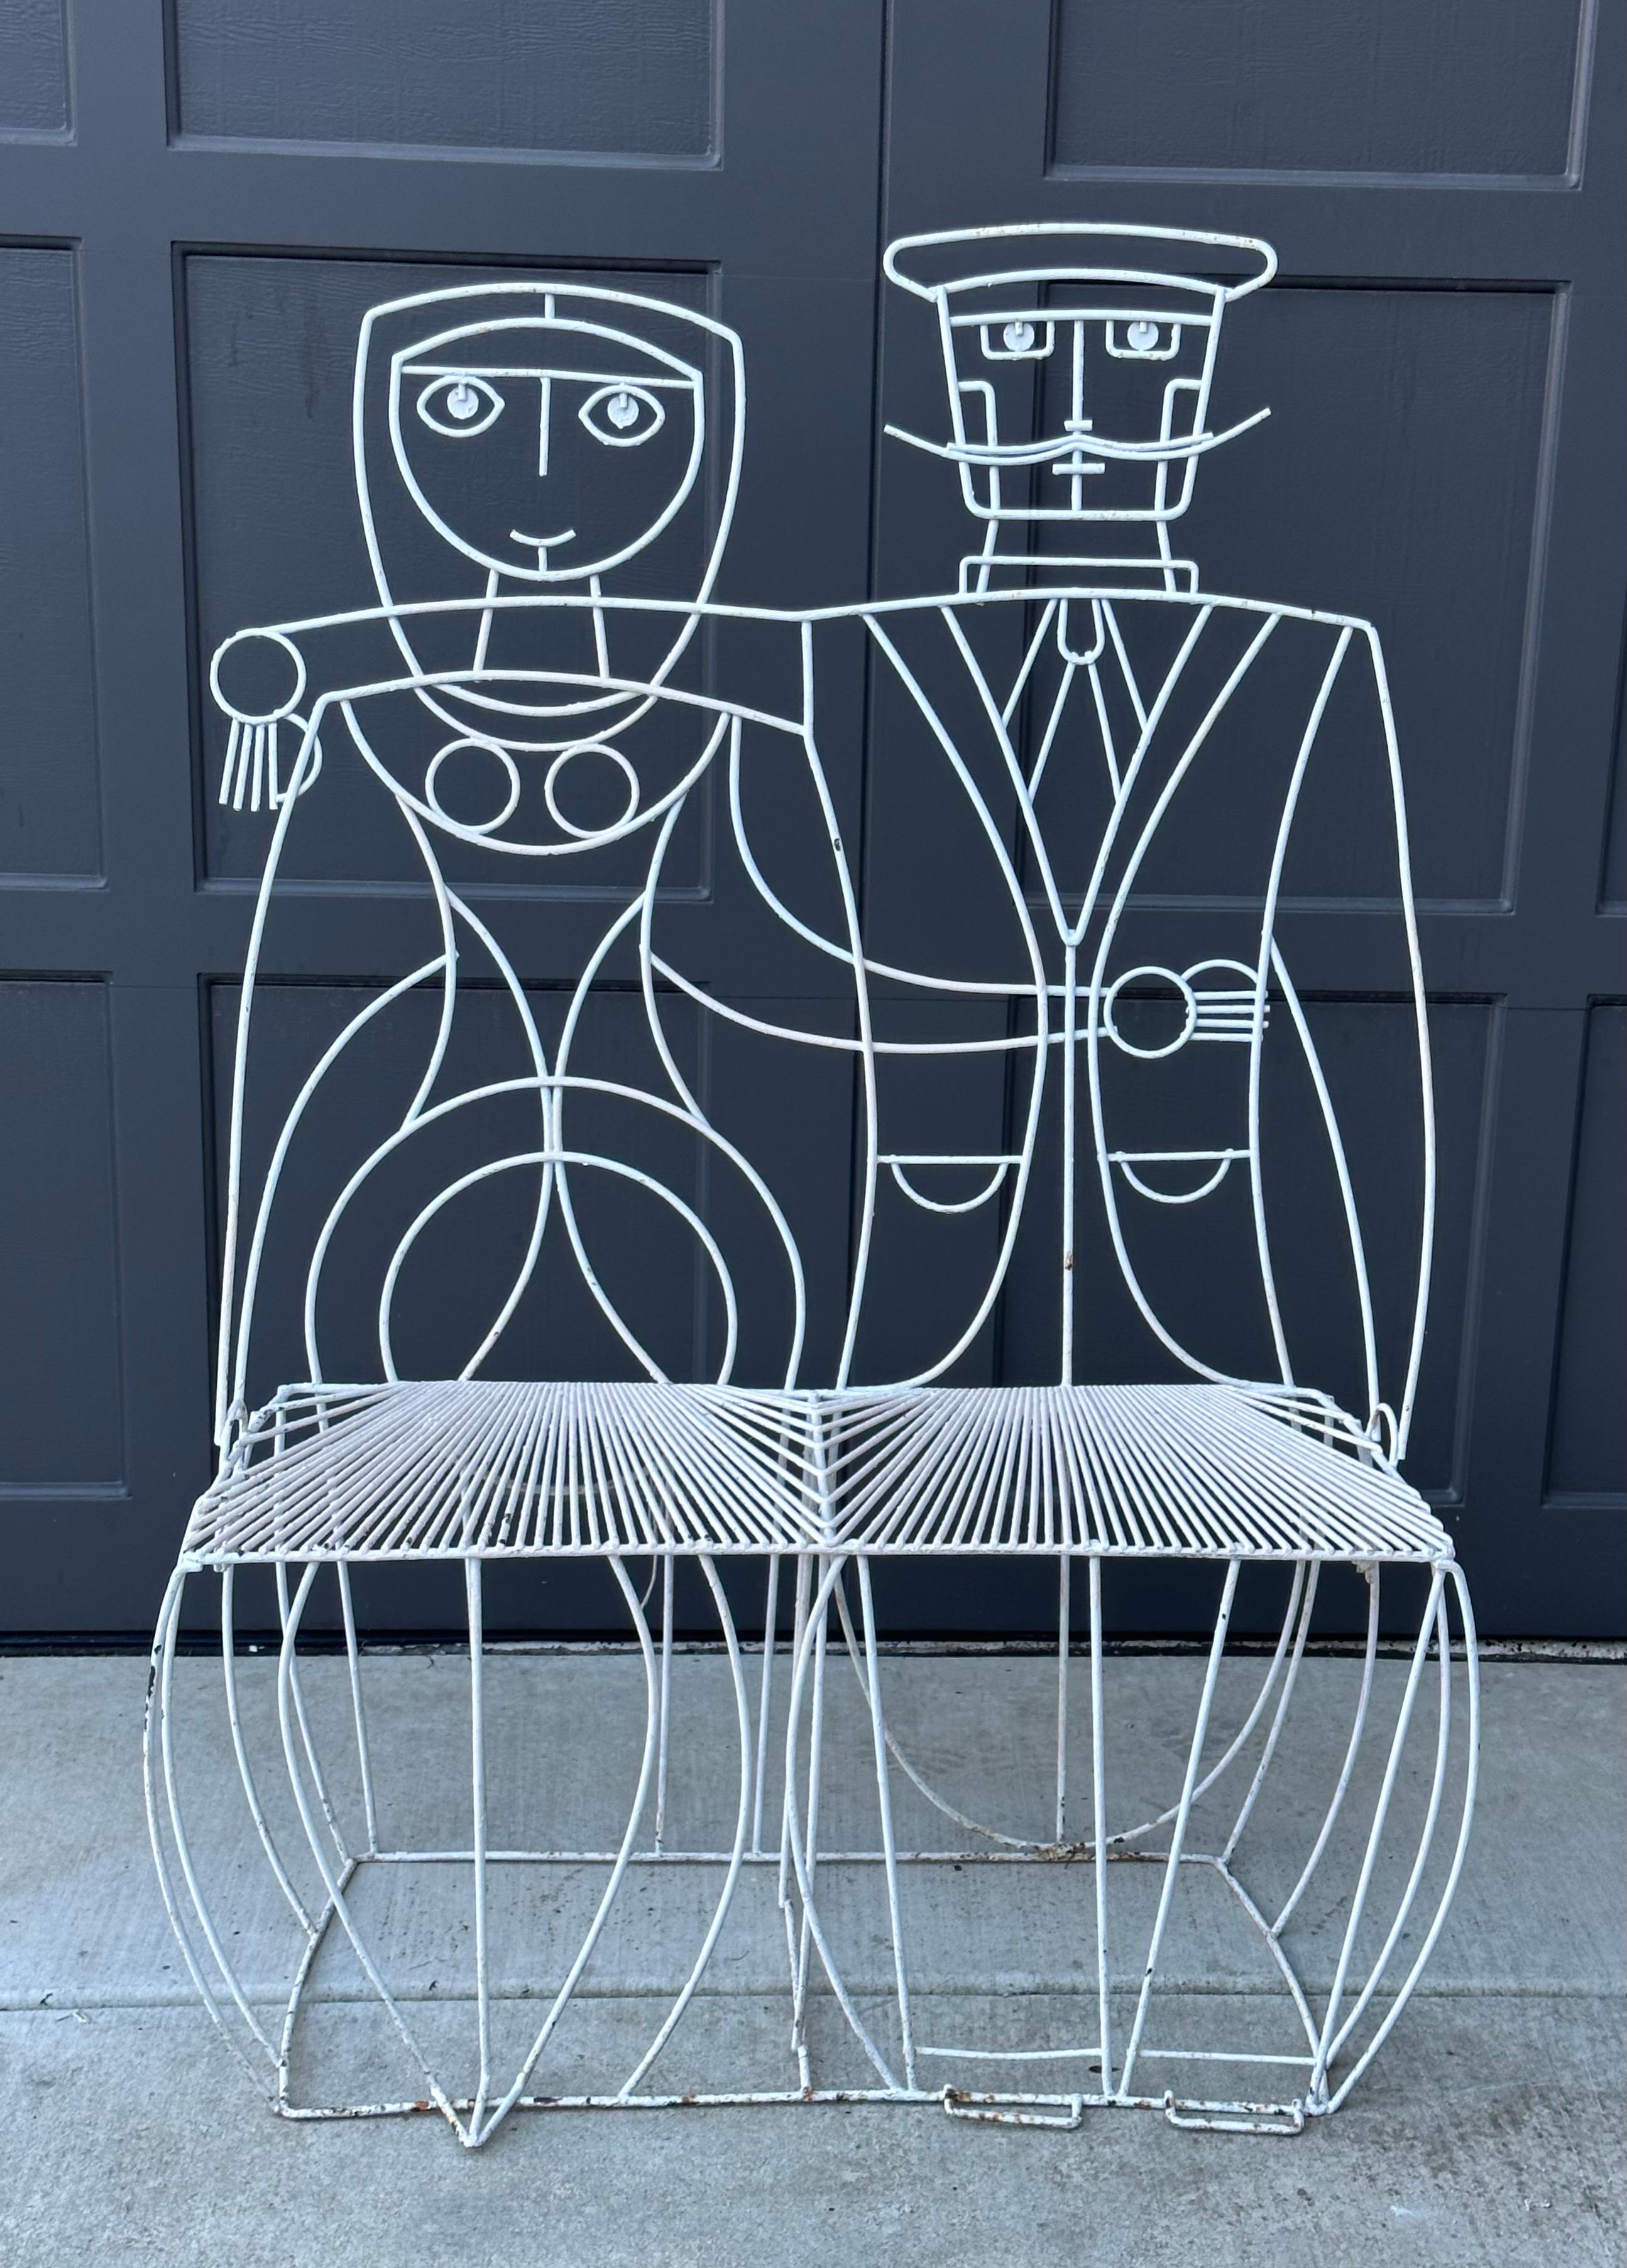 Whimsical Vintage Man & Woman Metal Wire Bench by John Risley For Sale 11